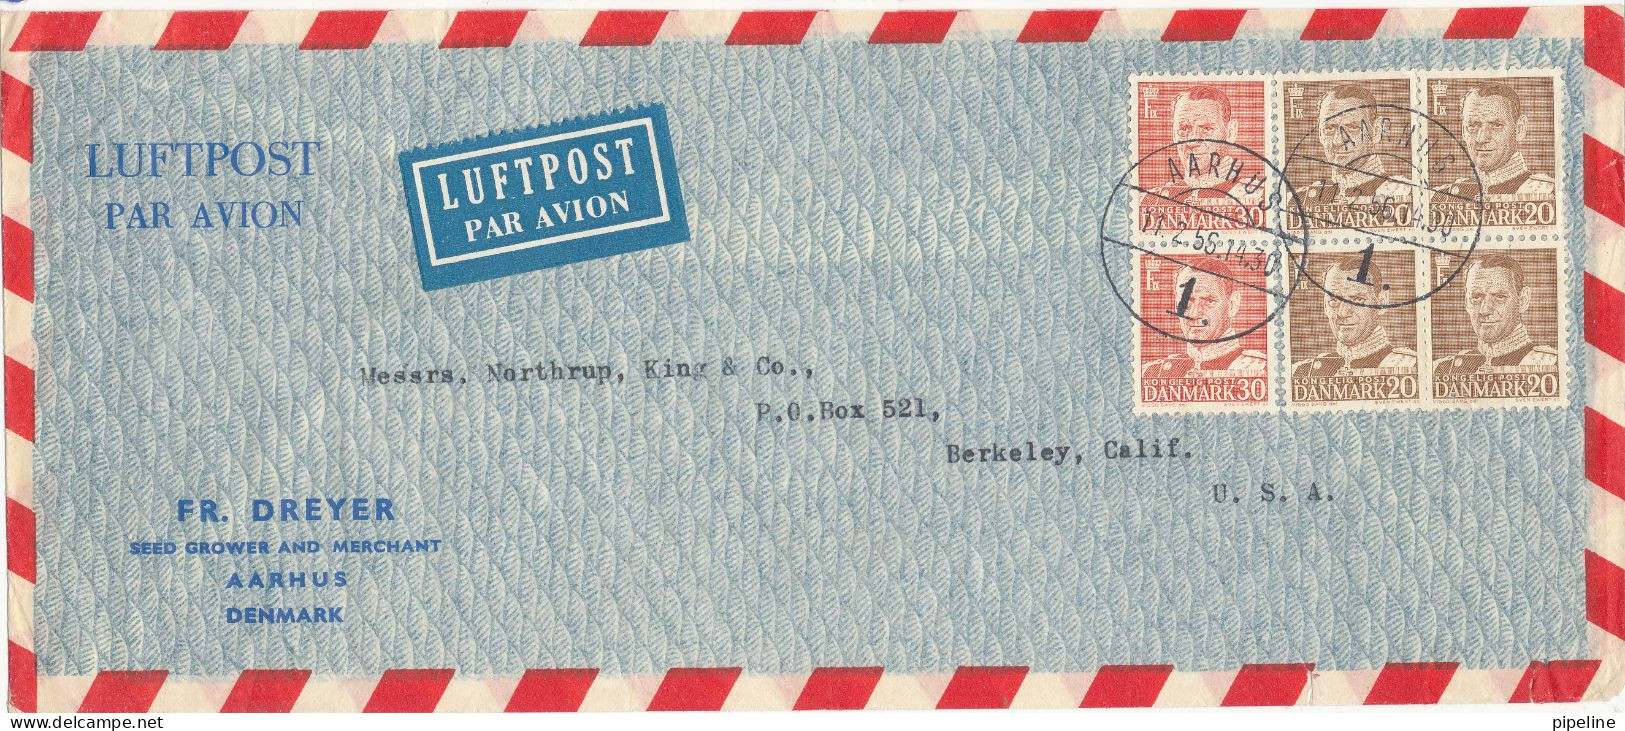 Denmark Air Mail Cover Sent To USA Aarhus 11-2-1956 Fr. Dreyer Seed Grower And Merchant - Luftpost